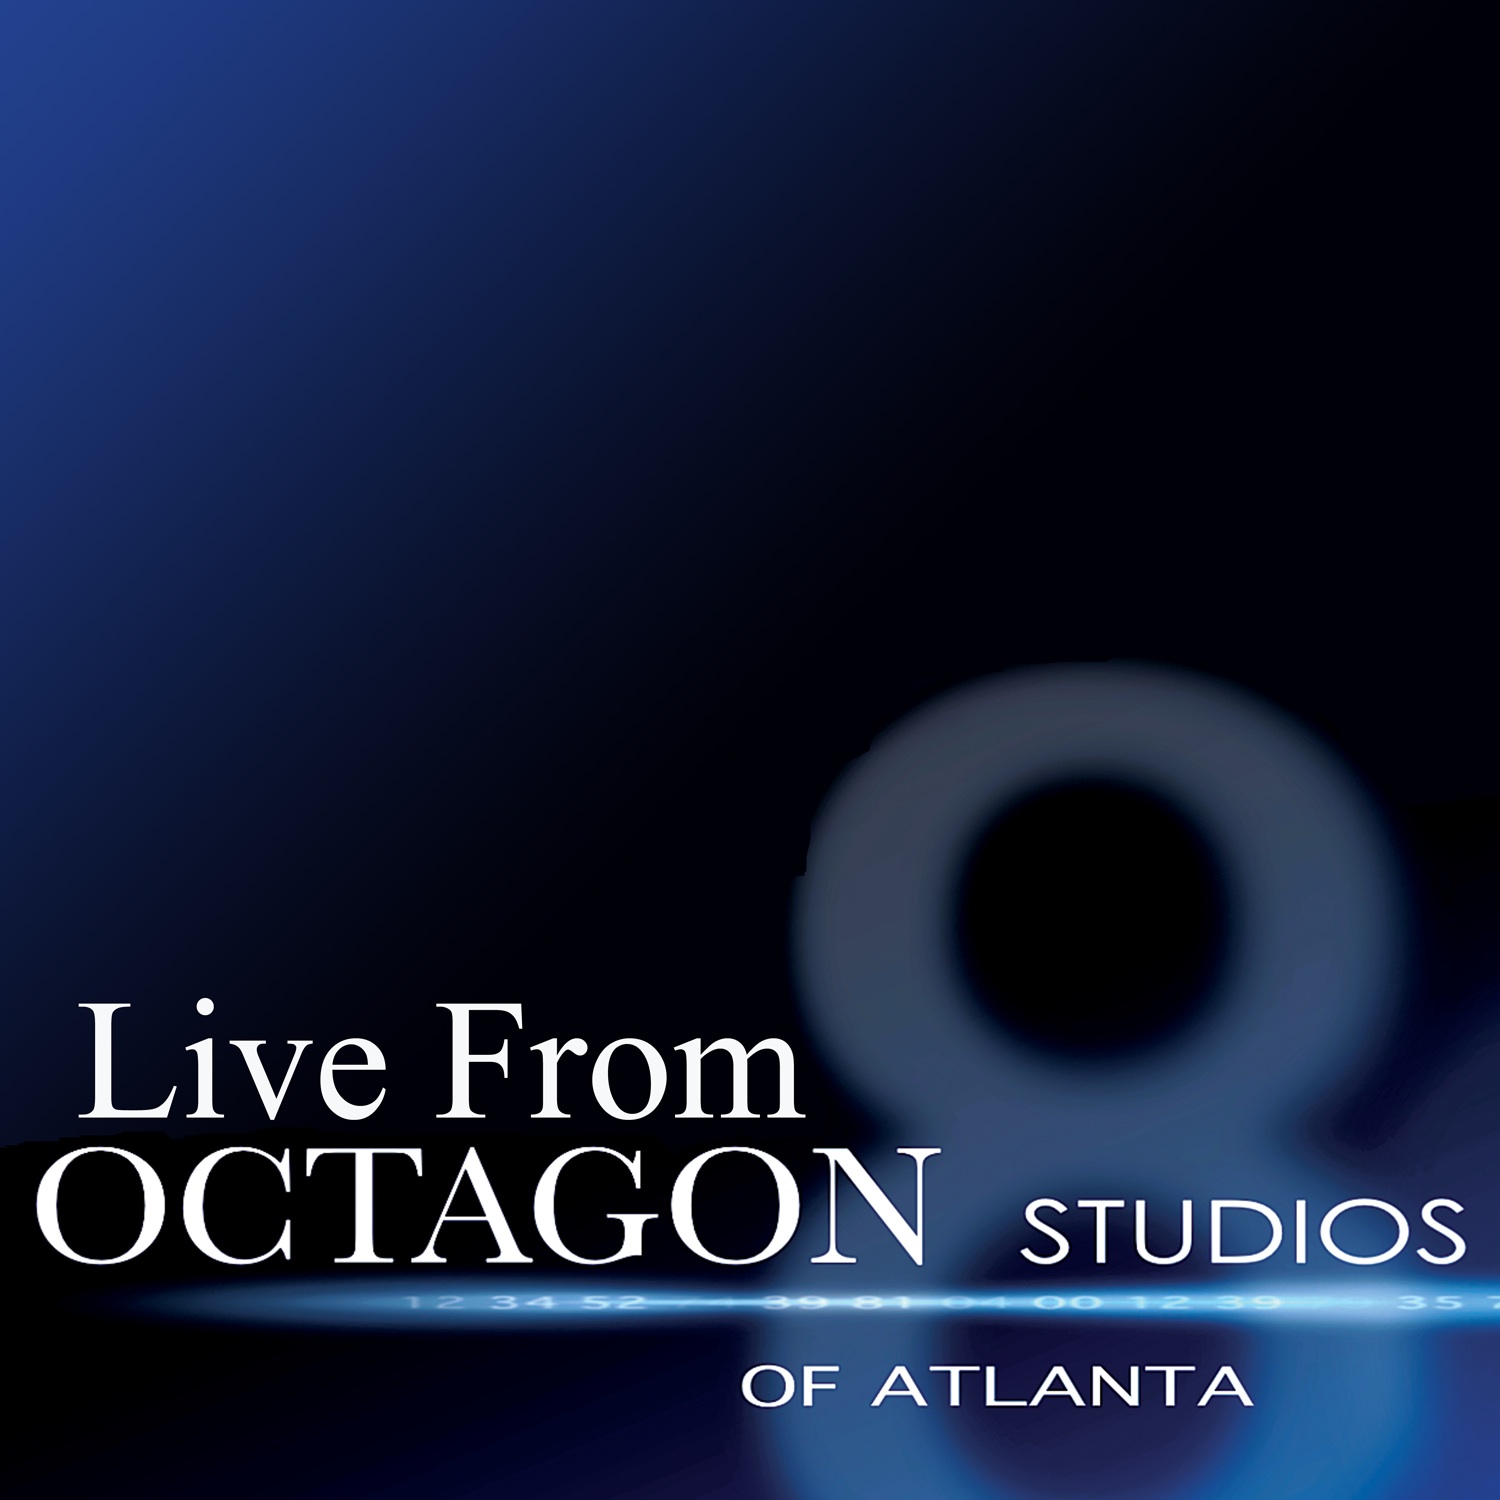 Another Live From Octagon Studios Preview